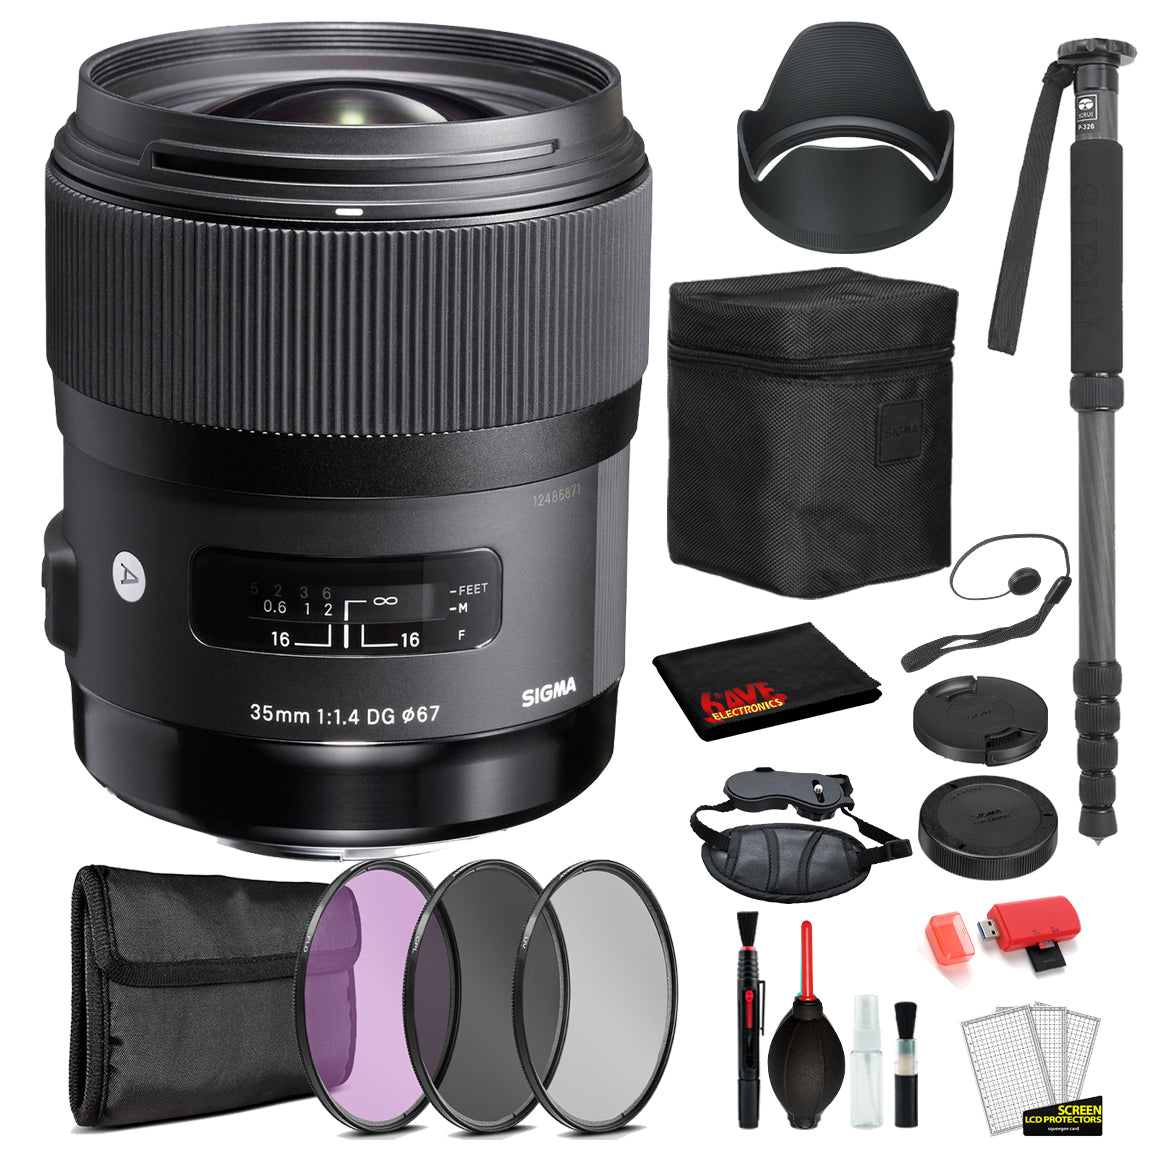 Sigma 35mm f/1.4 DG HSM Art Lens for Canon EF with Bundle includes: 3PC Filter Kit + 70? Monopod + More